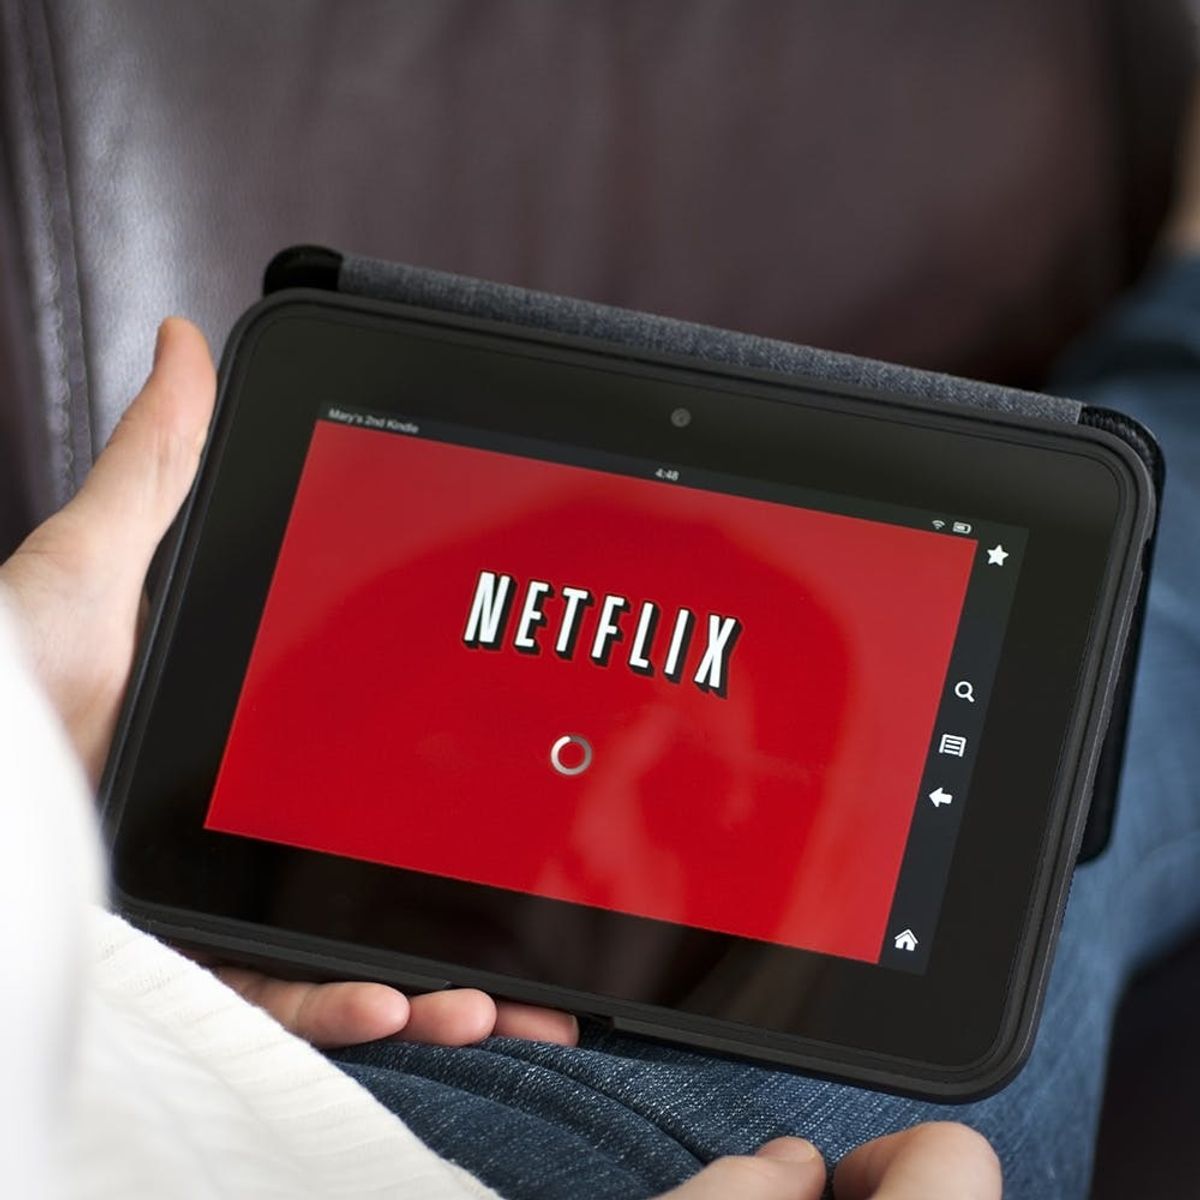 Netflix Subscribers Beware: You Could Be the Target of the Next Big Email Scam